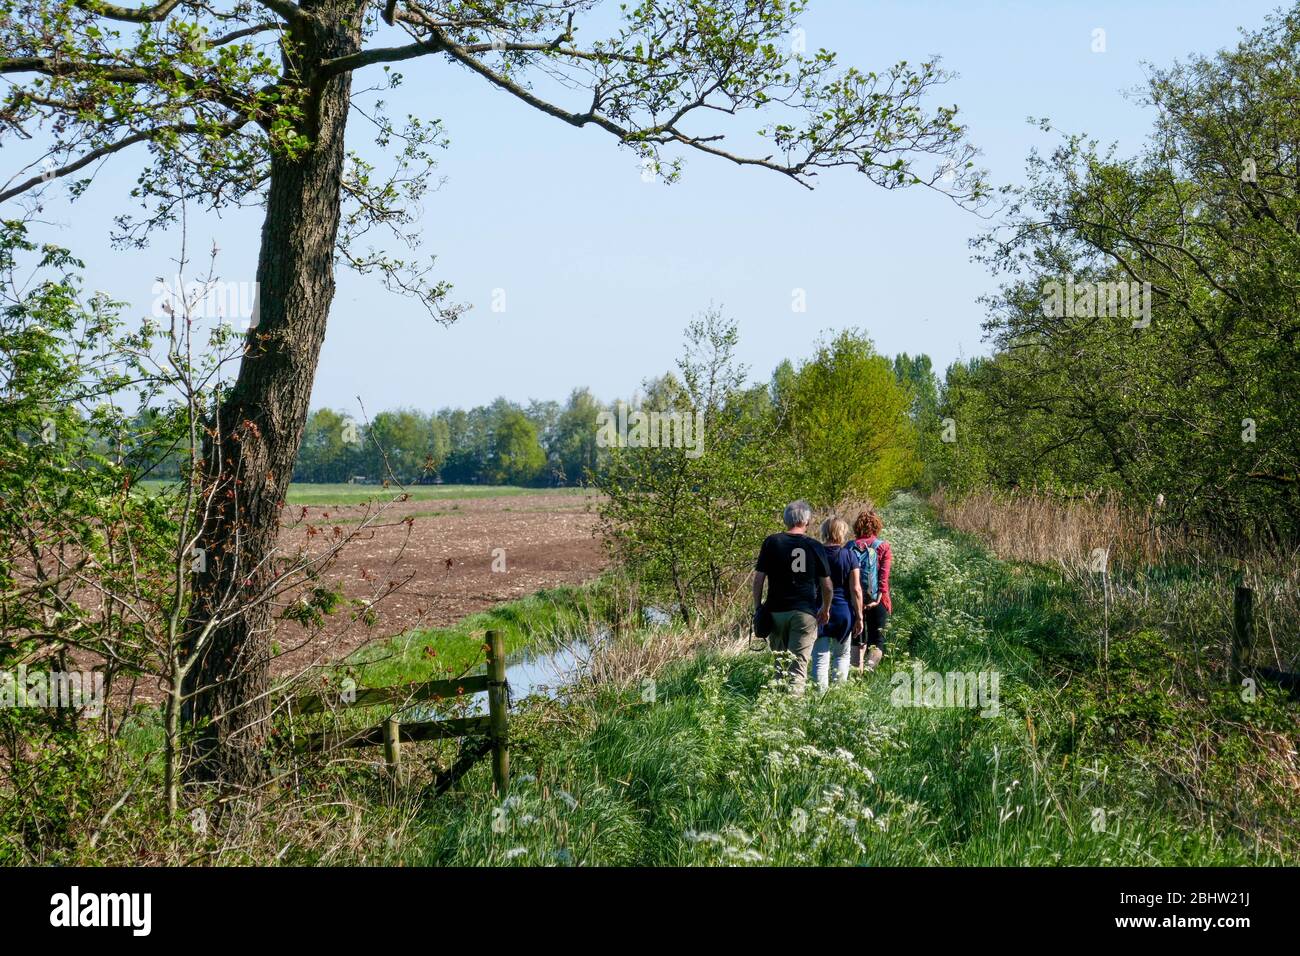 people walking on small path through rural area 'het groene hart' in west Holland Stock Photo